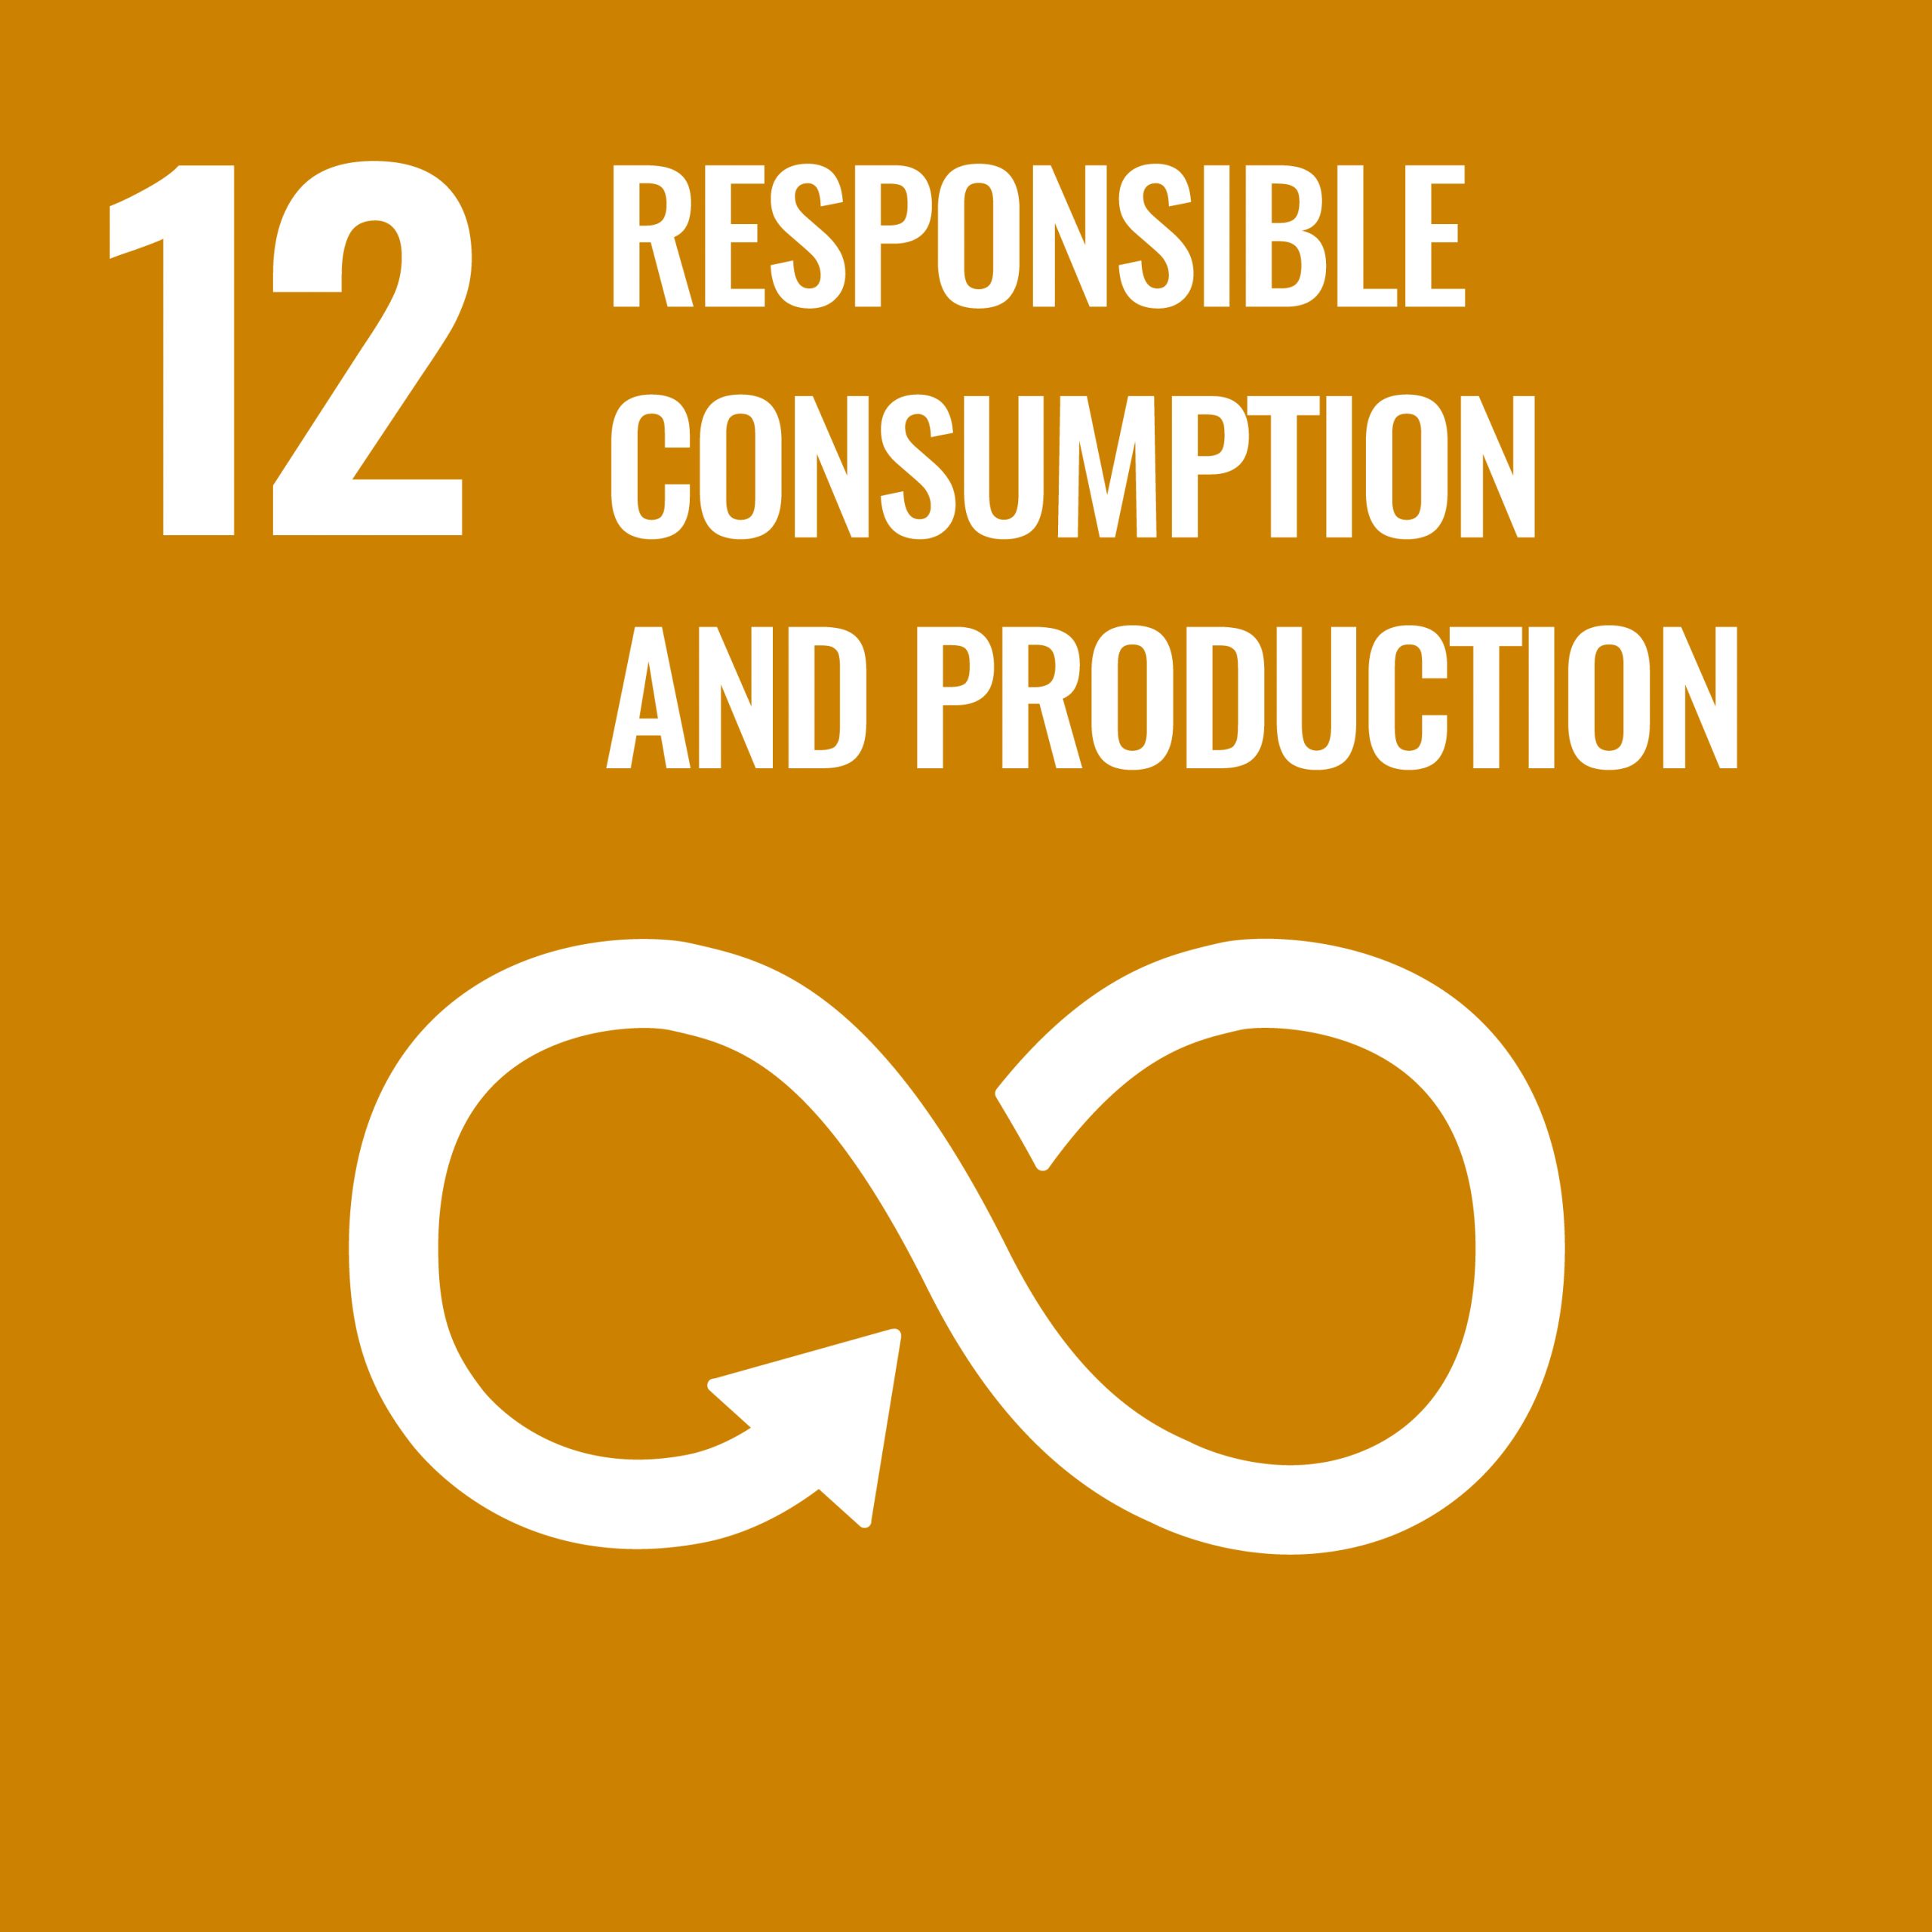 Rsponsible consumption and production - SDG 12